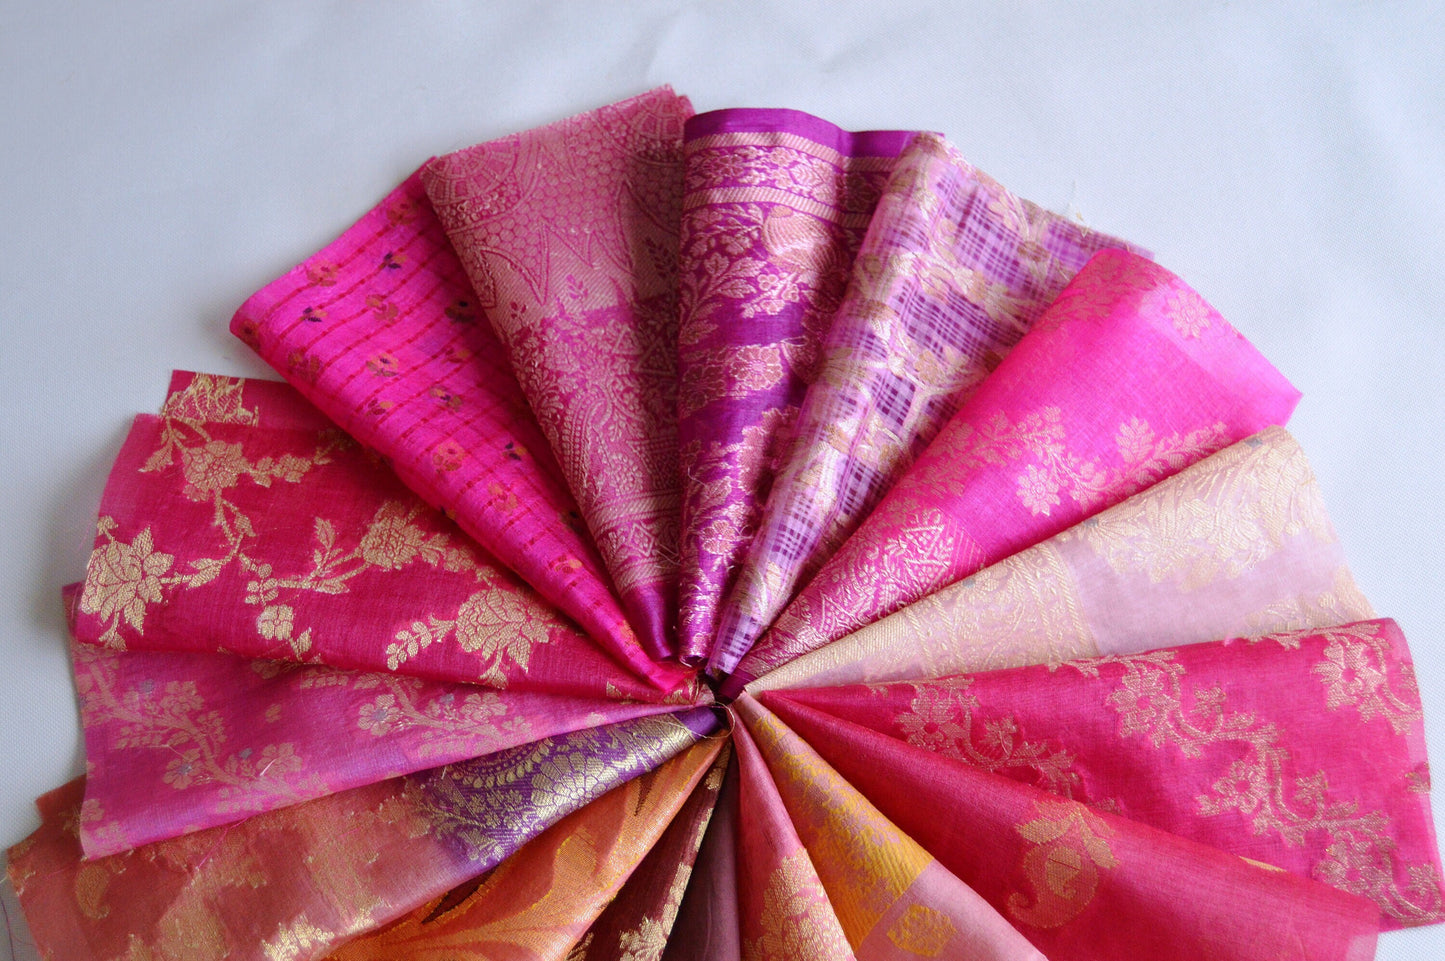 5 Inch x 16 Pieces Pink Recycled Vintage Silk Sari Scraps Brocade Fabric Card Making Collage Mixed Media Textile Art Junk Journals